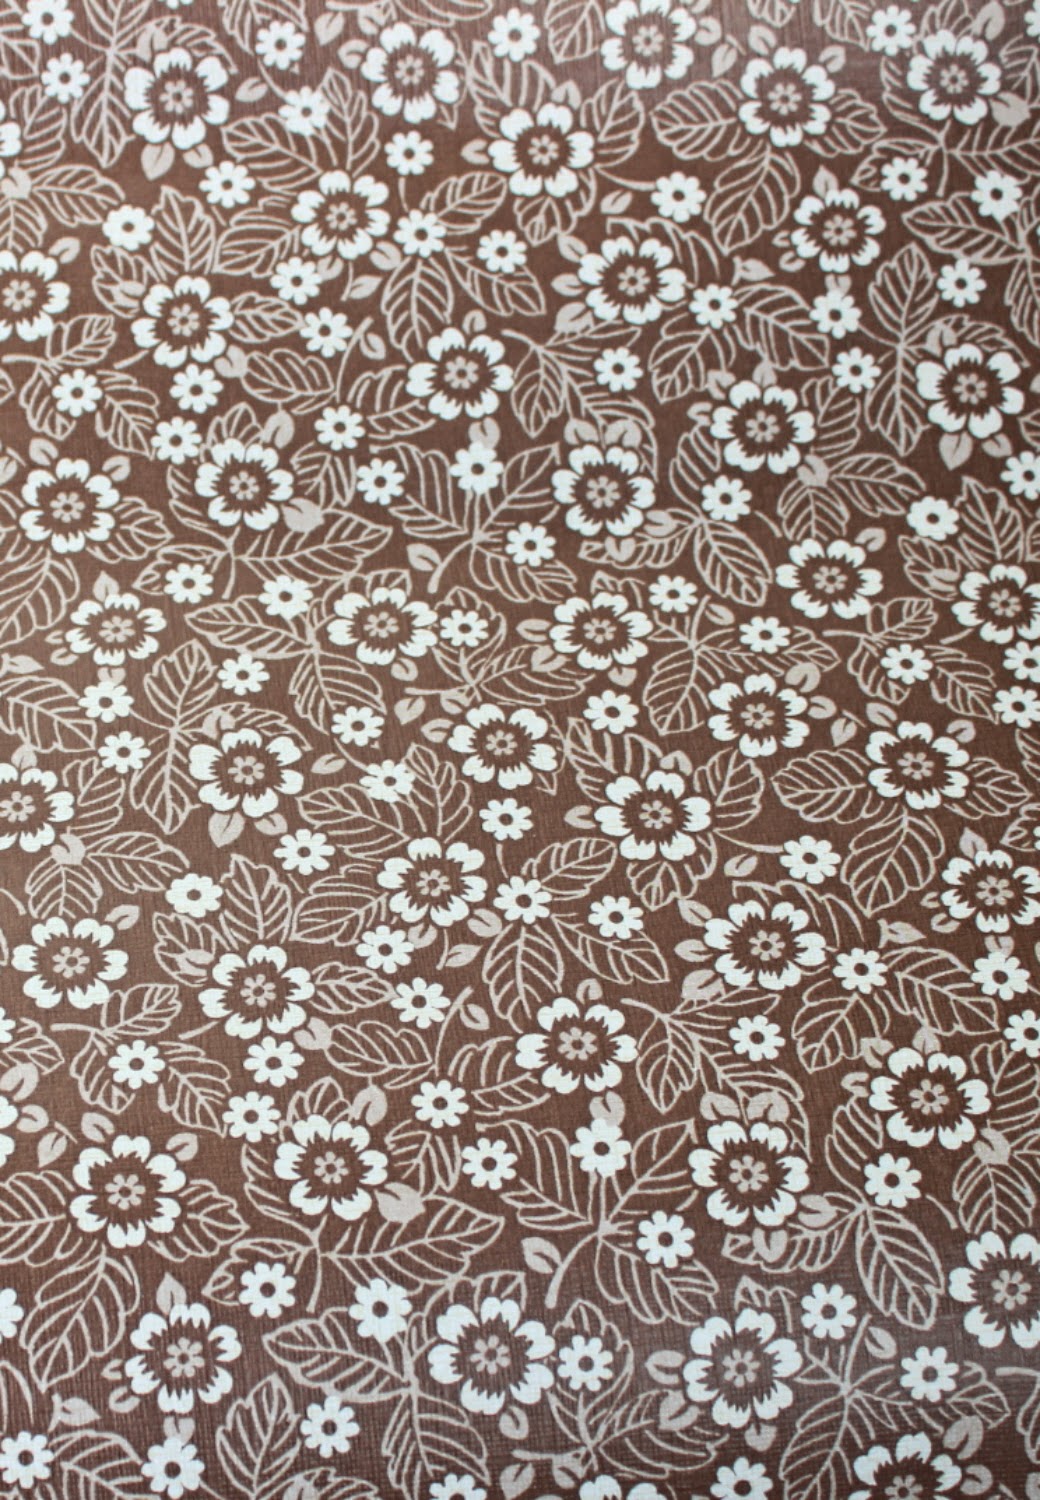 Wall Paper With A Millefleur Design Since It Is Brown And White